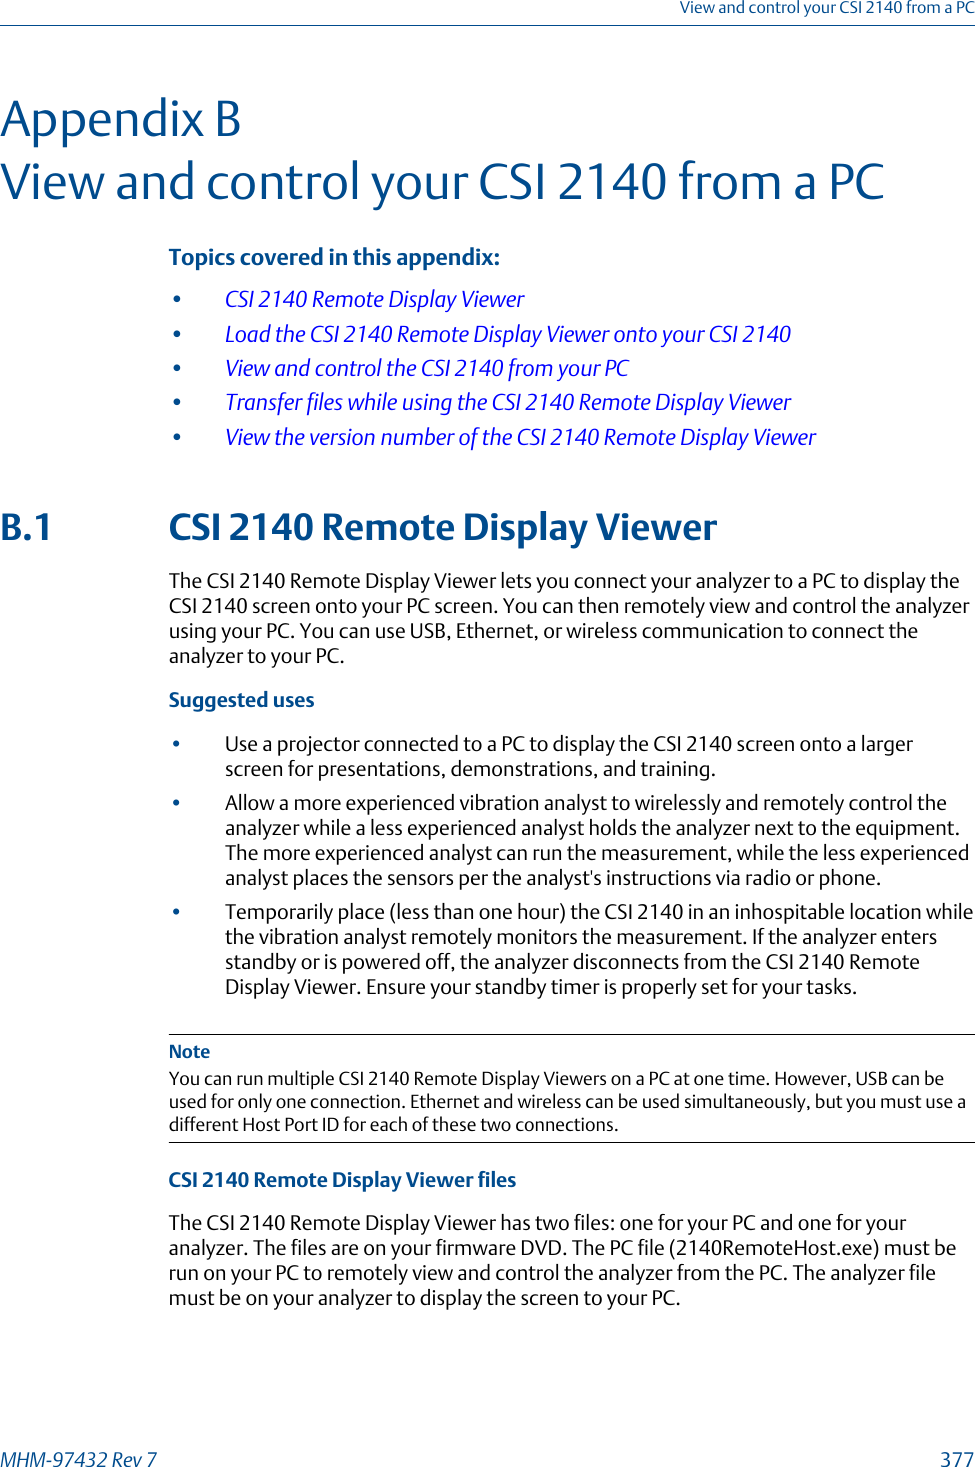 Appendix BView and control your CSI 2140 from a PCTopics covered in this appendix:•CSI 2140 Remote Display Viewer•Load the CSI 2140 Remote Display Viewer onto your CSI 2140•View and control the CSI 2140 from your PC•Transfer files while using the CSI 2140 Remote Display Viewer•View the version number of the CSI 2140 Remote Display ViewerB.1 CSI 2140 Remote Display ViewerThe CSI 2140 Remote Display Viewer lets you connect your analyzer to a PC to display theCSI 2140 screen onto your PC screen. You can then remotely view and control the analyzerusing your PC. You can use USB, Ethernet, or wireless communication to connect theanalyzer to your PC.Suggested uses•Use a projector connected to a PC to display the CSI 2140 screen onto a largerscreen for presentations, demonstrations, and training.•Allow a more experienced vibration analyst to wirelessly and remotely control theanalyzer while a less experienced analyst holds the analyzer next to the equipment.The more experienced analyst can run the measurement, while the less experiencedanalyst places the sensors per the analyst&apos;s instructions via radio or phone.•Temporarily place (less than one hour) the CSI 2140 in an inhospitable location whilethe vibration analyst remotely monitors the measurement. If the analyzer entersstandby or is powered off, the analyzer disconnects from the CSI 2140 RemoteDisplay Viewer. Ensure your standby timer is properly set for your tasks.NoteYou can run multiple CSI 2140 Remote Display Viewers on a PC at one time. However, USB can beused for only one connection. Ethernet and wireless can be used simultaneously, but you must use adifferent Host Port ID for each of these two connections.CSI 2140 Remote Display Viewer filesThe CSI 2140 Remote Display Viewer has two files: one for your PC and one for youranalyzer. The files are on your firmware DVD. The PC file (2140RemoteHost.exe) must berun on your PC to remotely view and control the analyzer from the PC. The analyzer filemust be on your analyzer to display the screen to your PC.View and control your CSI 2140 from a PCMHM-97432 Rev 7  377